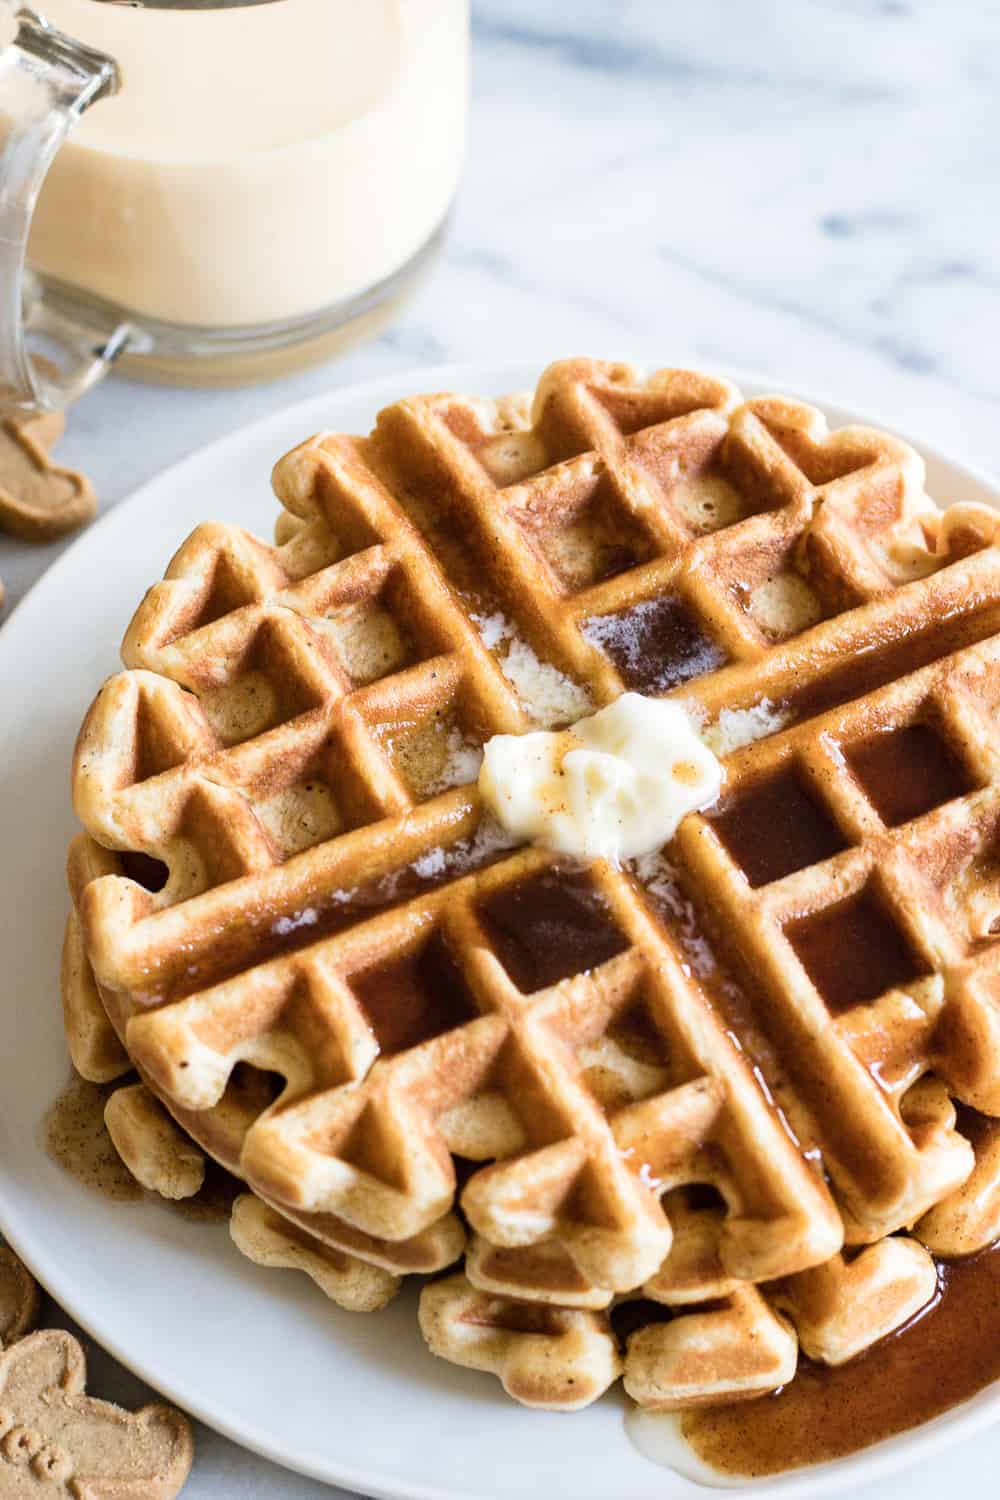 2 Light and fluffy waffles on a white plate.